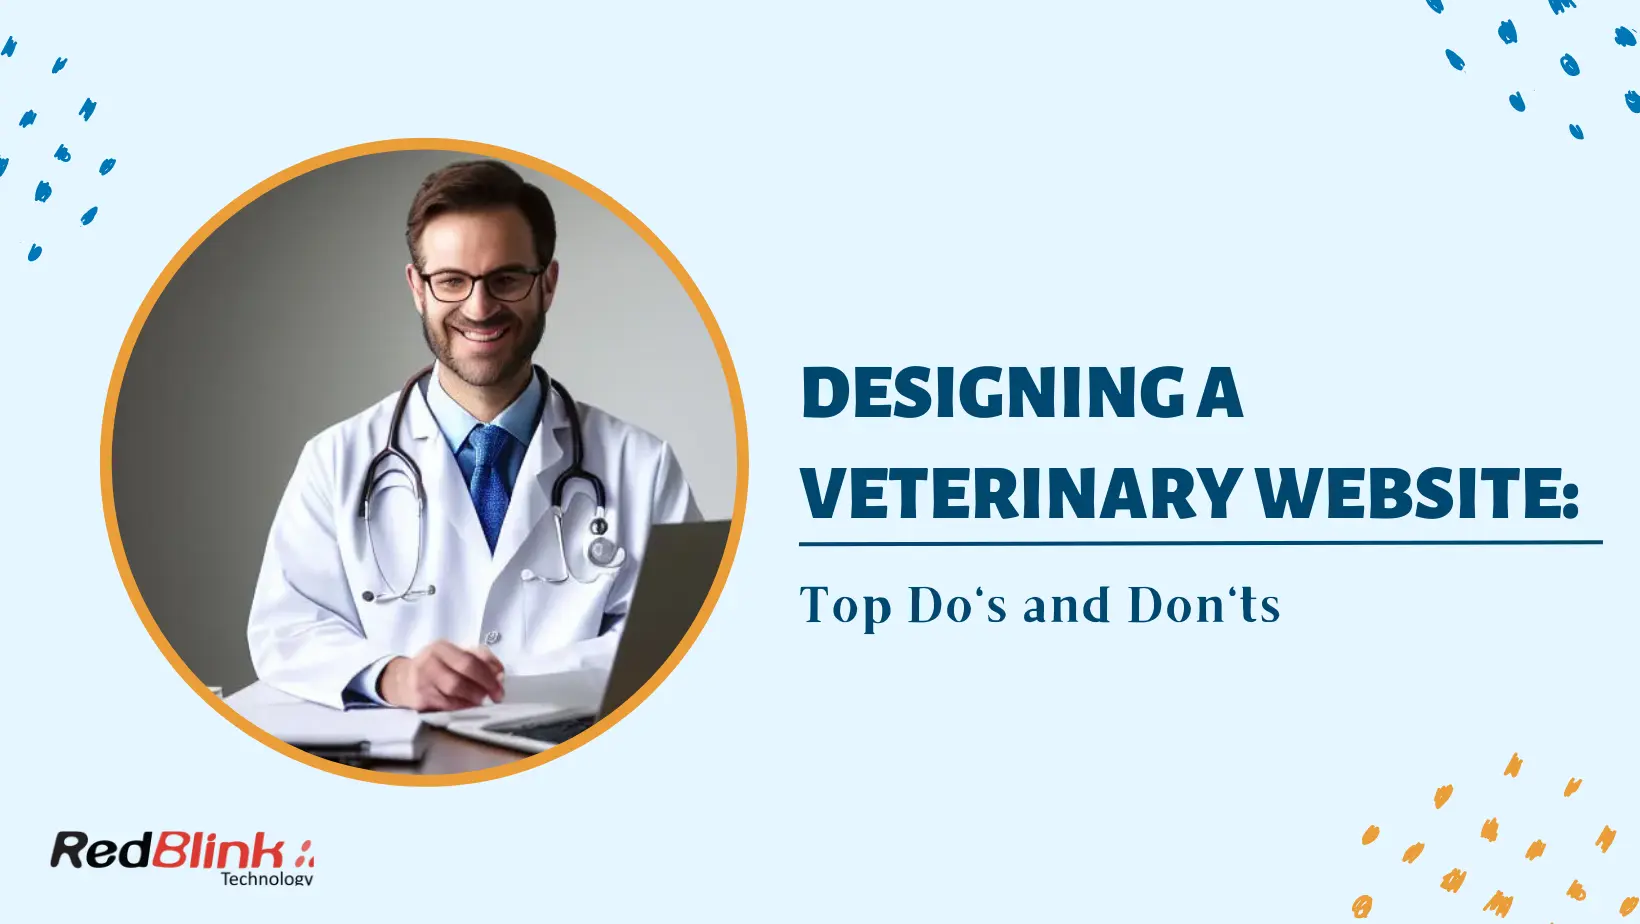 Designing a Veterinary Website - Top Dos and Donts